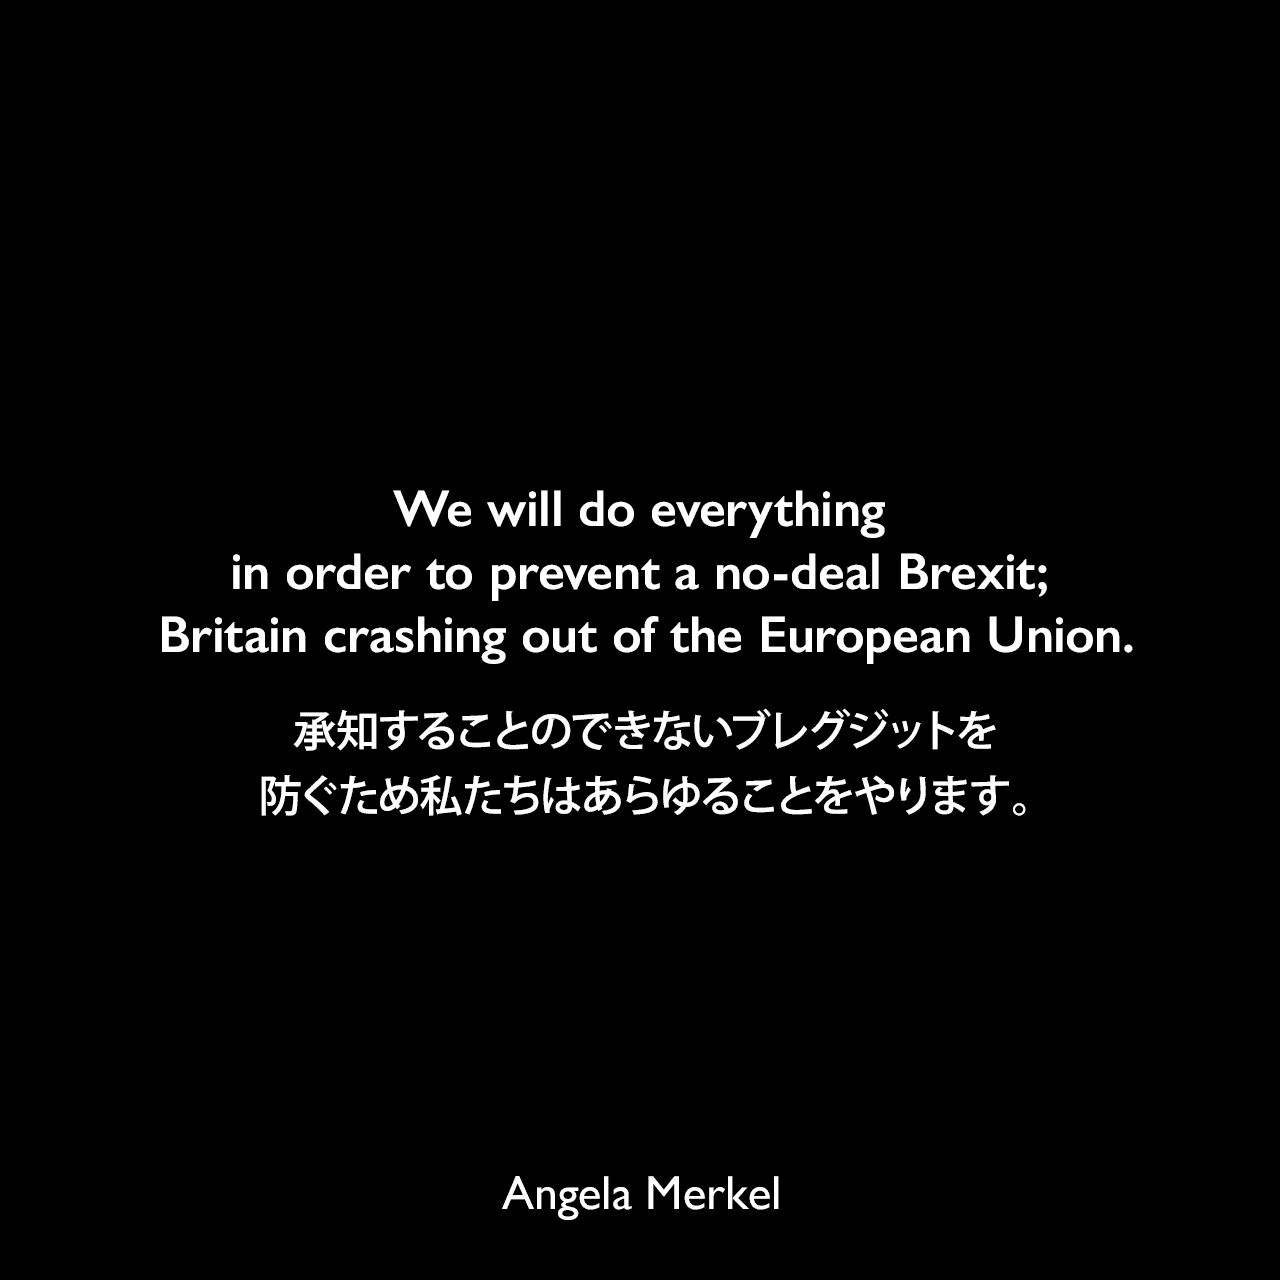 We will do everything in order to prevent a no-deal Brexit; Britain crashing out of the European Union.承知することのできないブレグジットを防ぐため私たちはあらゆることをやります。- 2019年4月5日のBBCニュースよりAngela Merkel